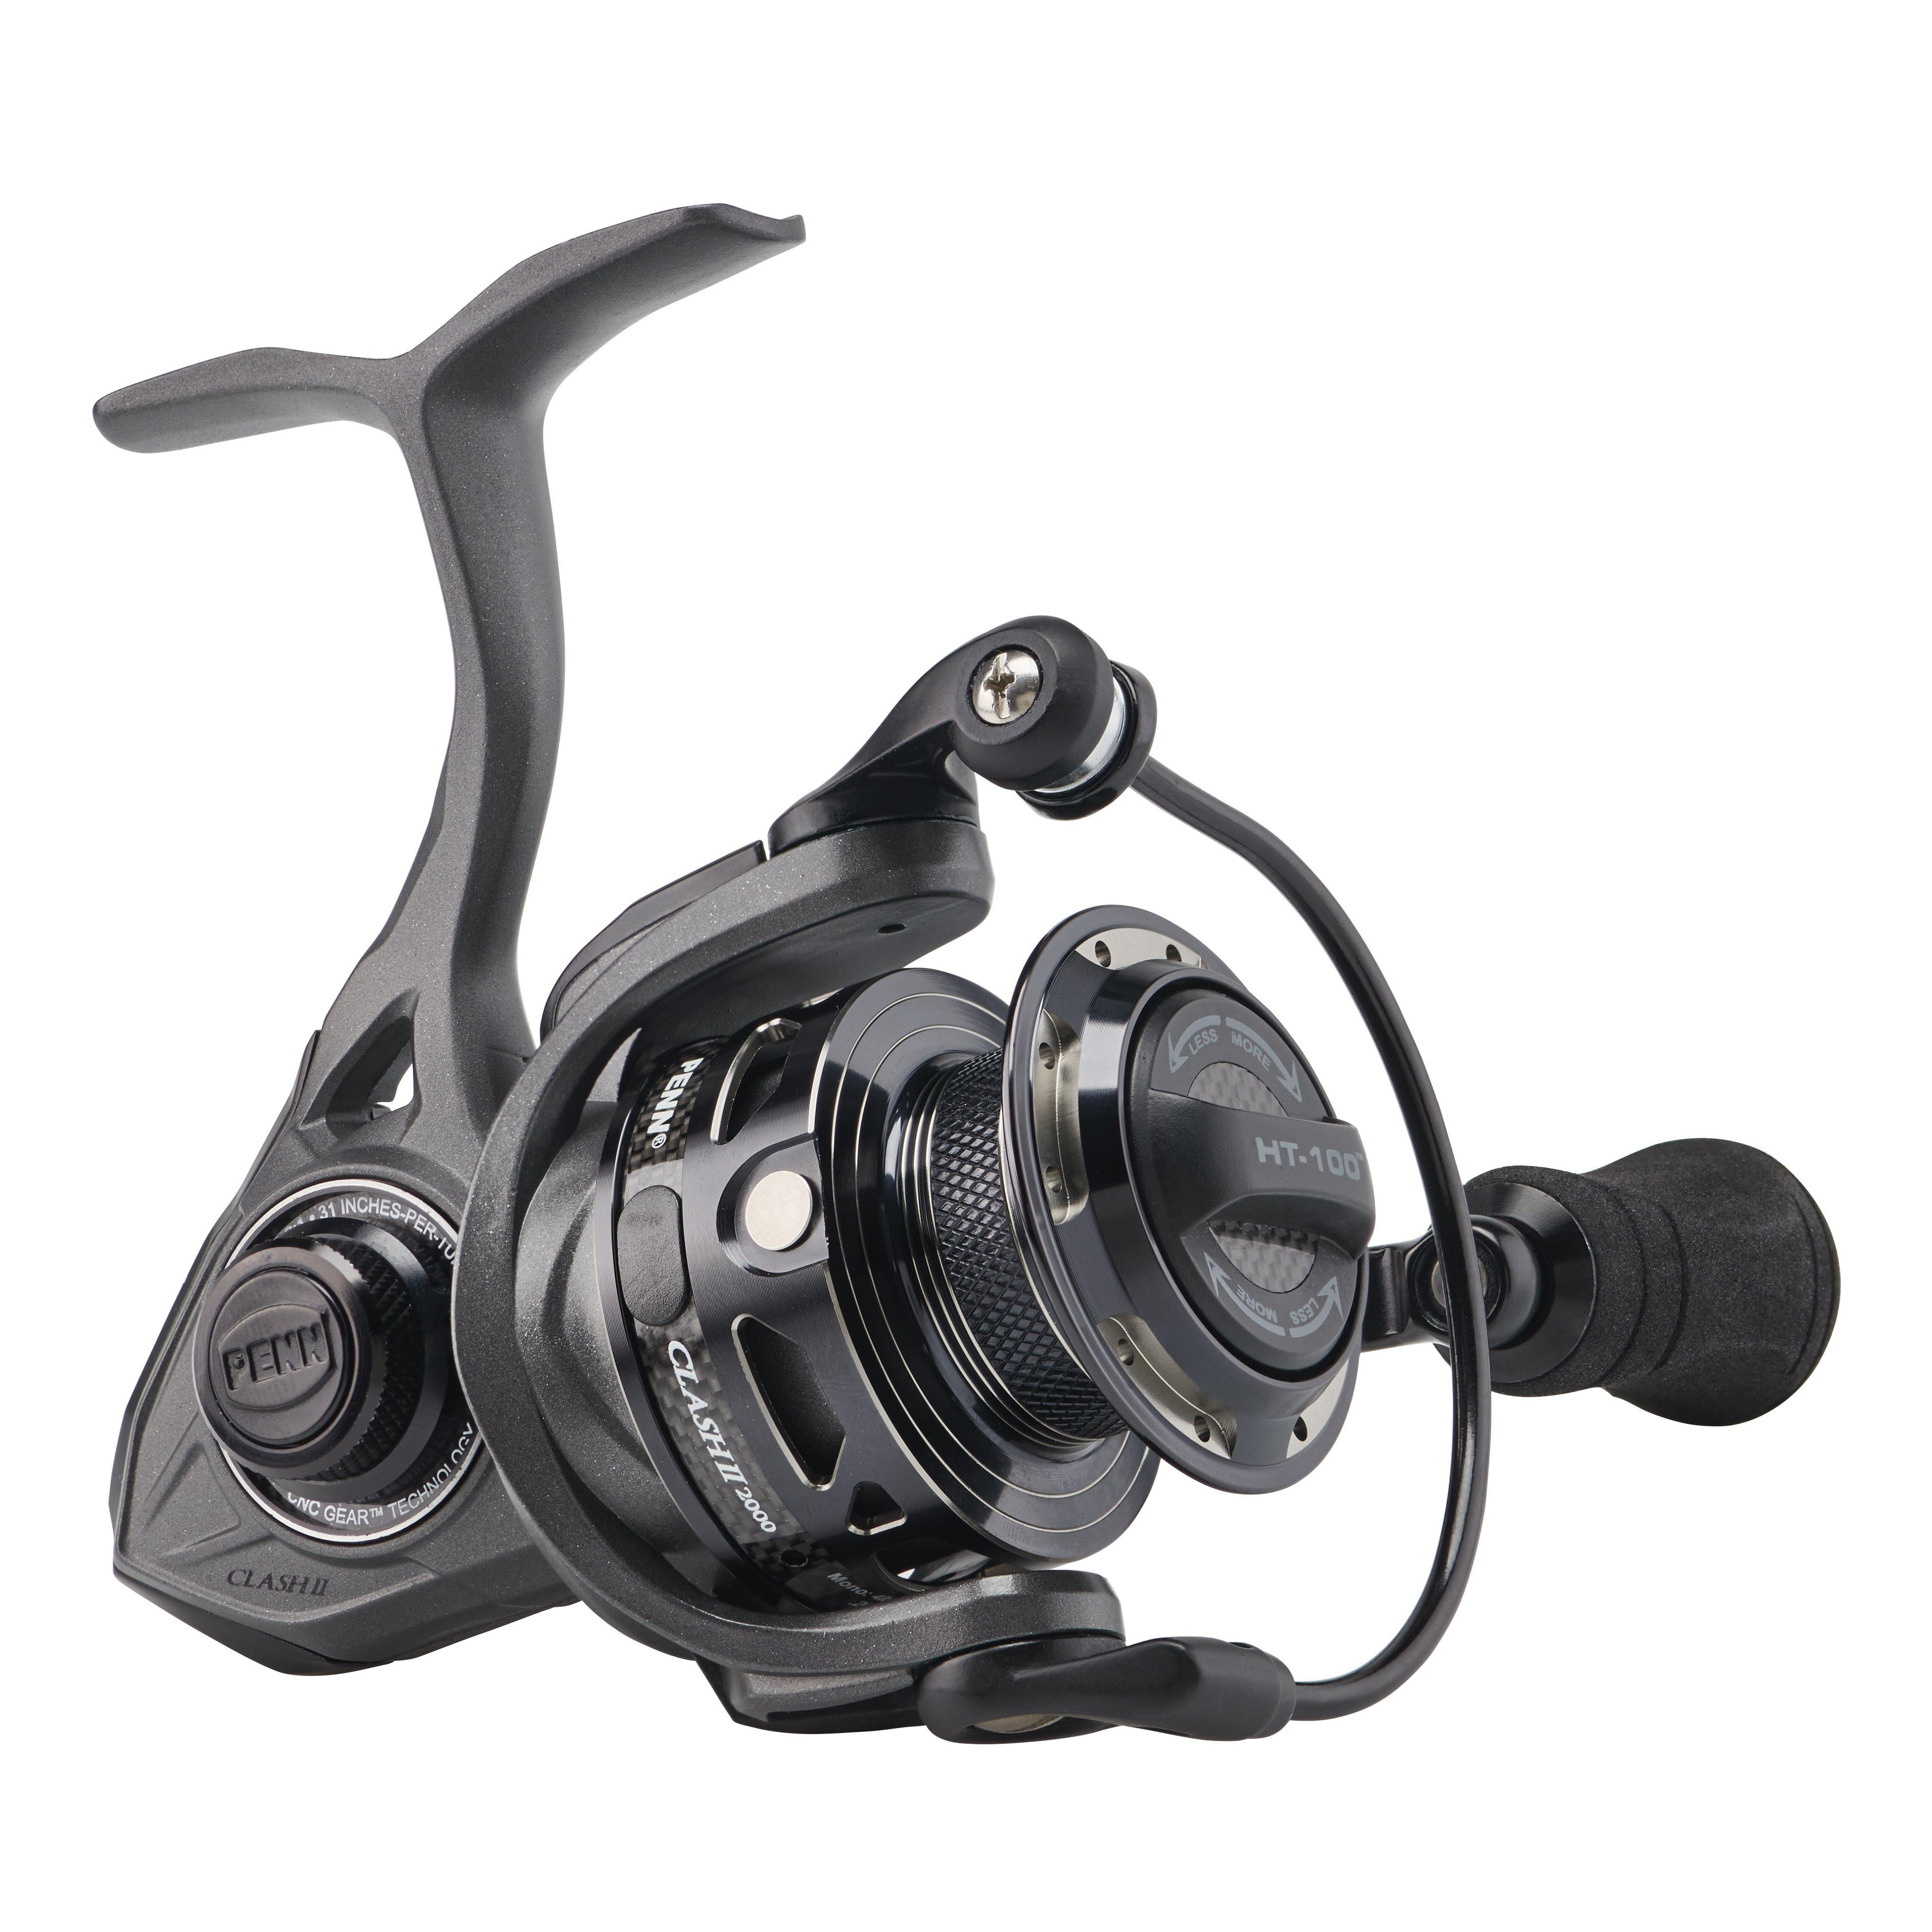 (2) Large Capacity Spinning Reels